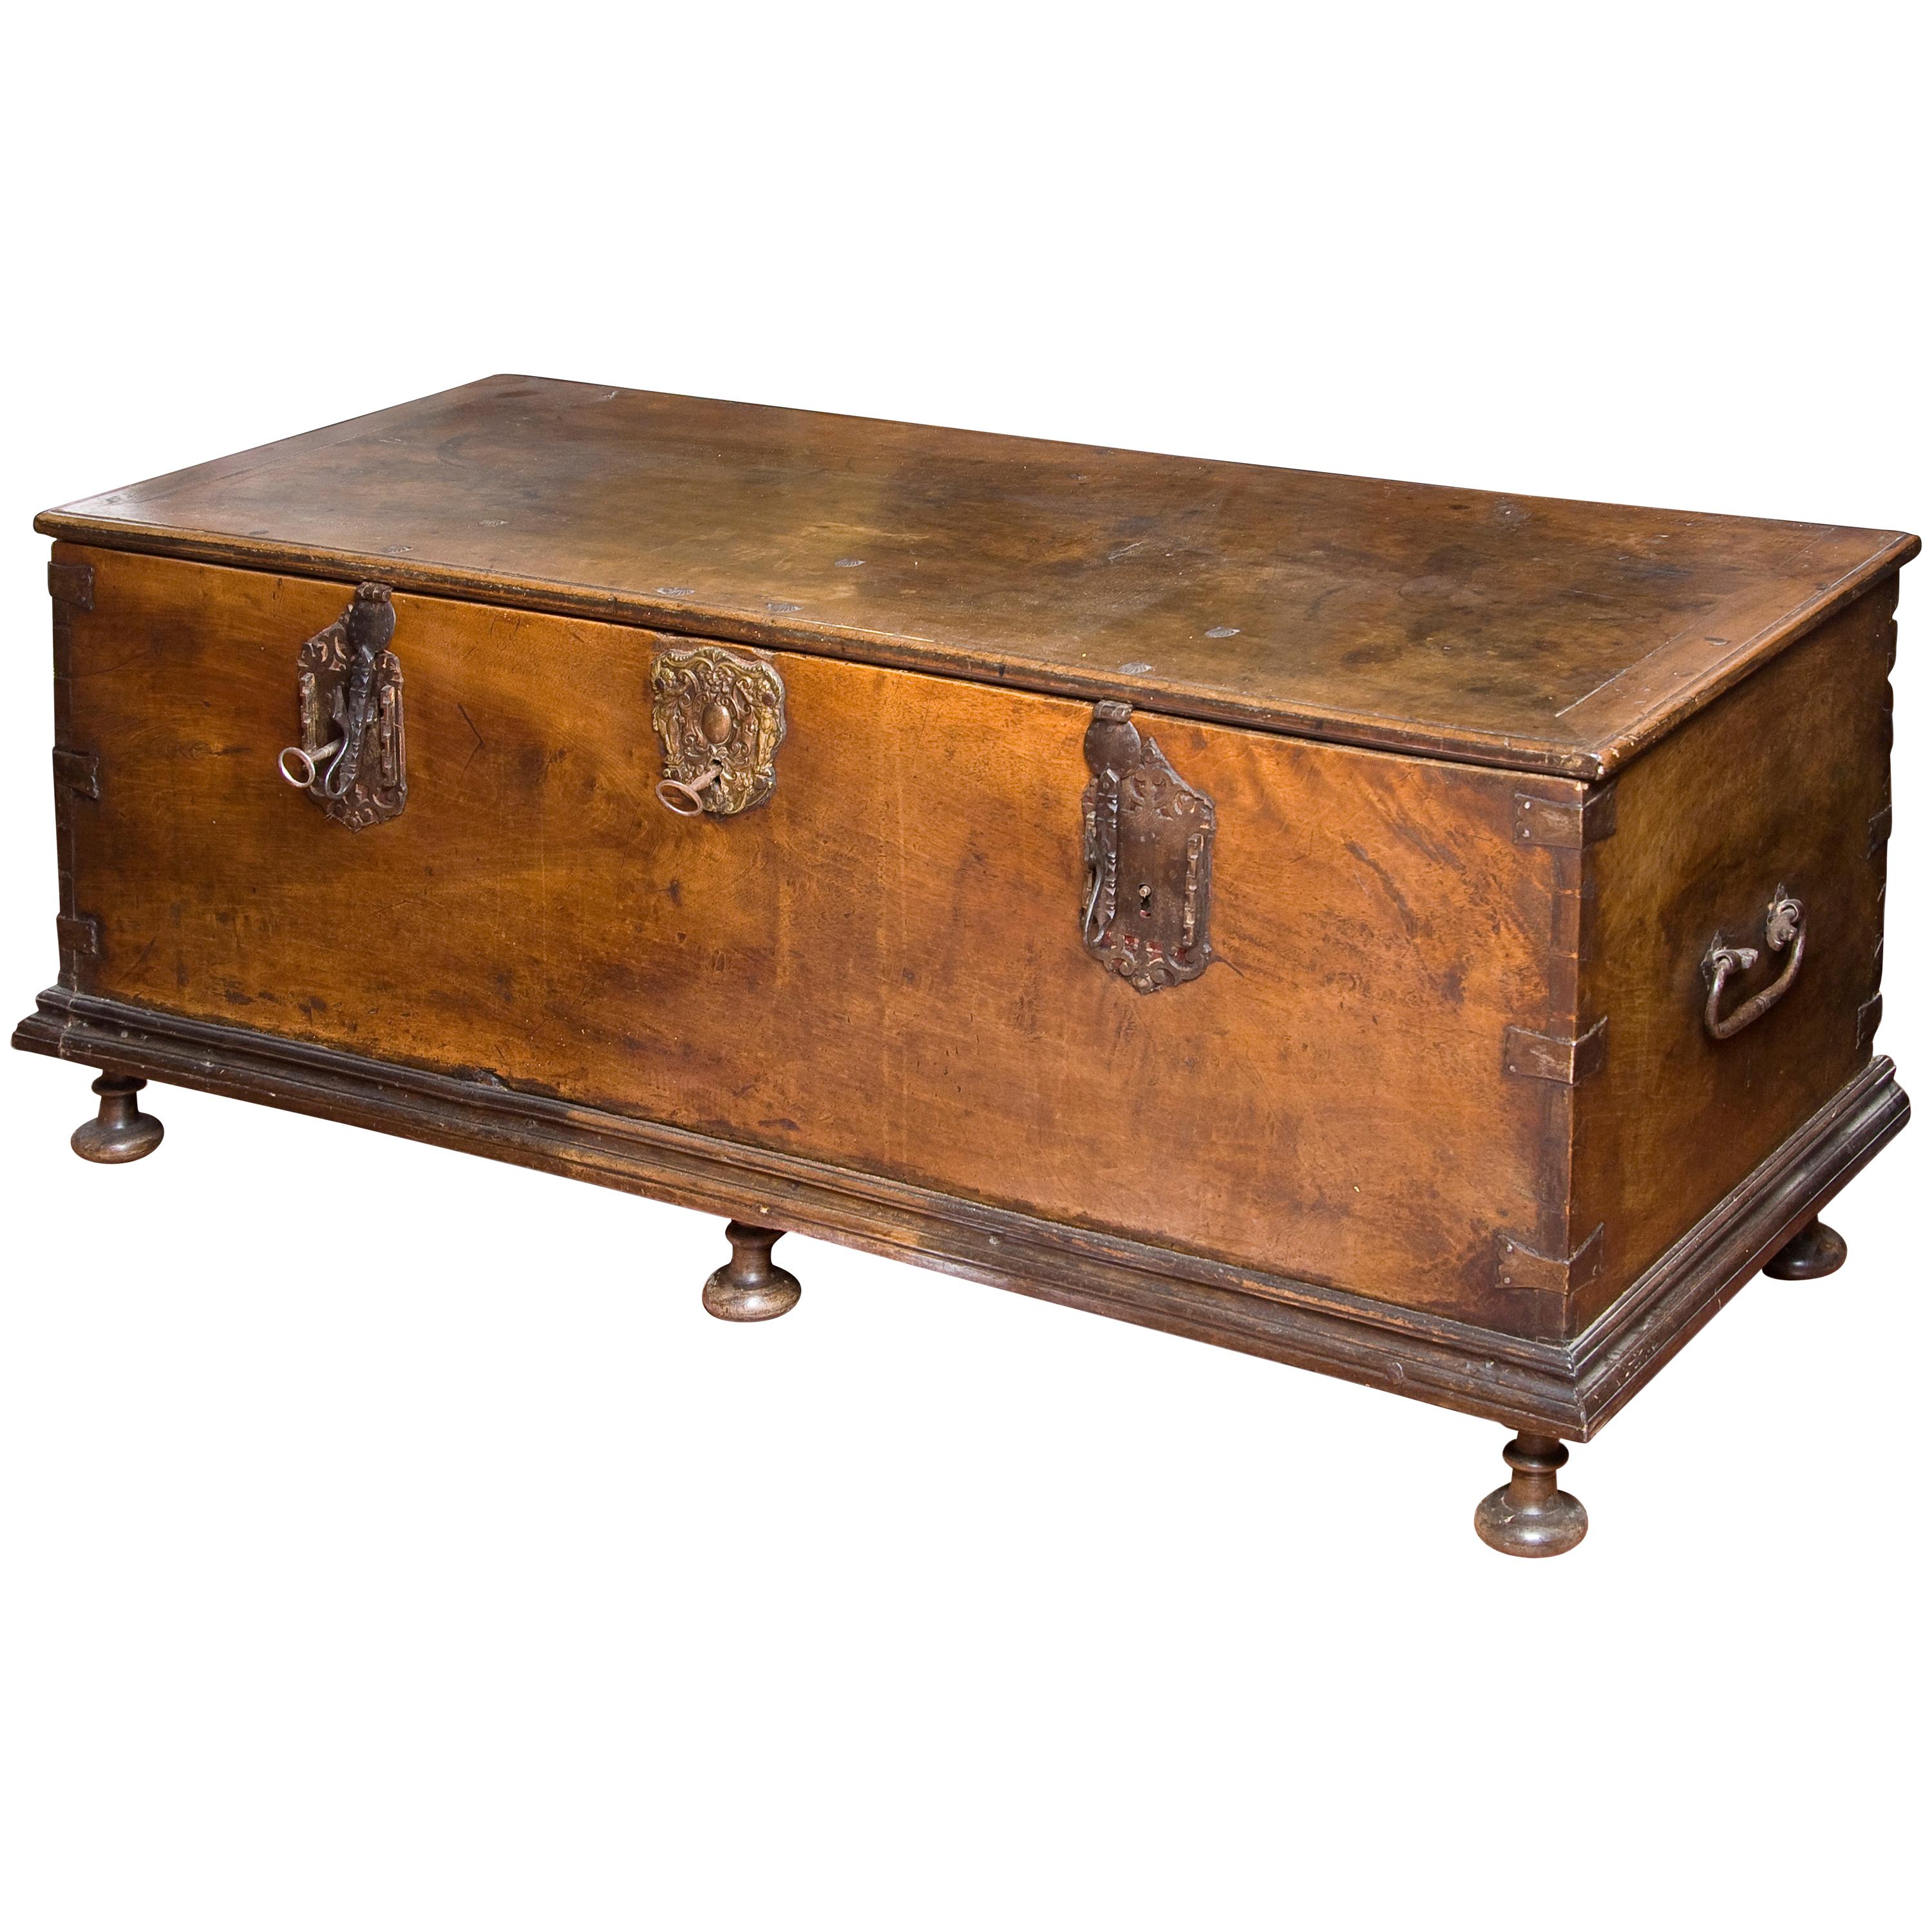 Council or City Hall Chest Walnut, Wrought Iron, Spain, 17th Century with Restor